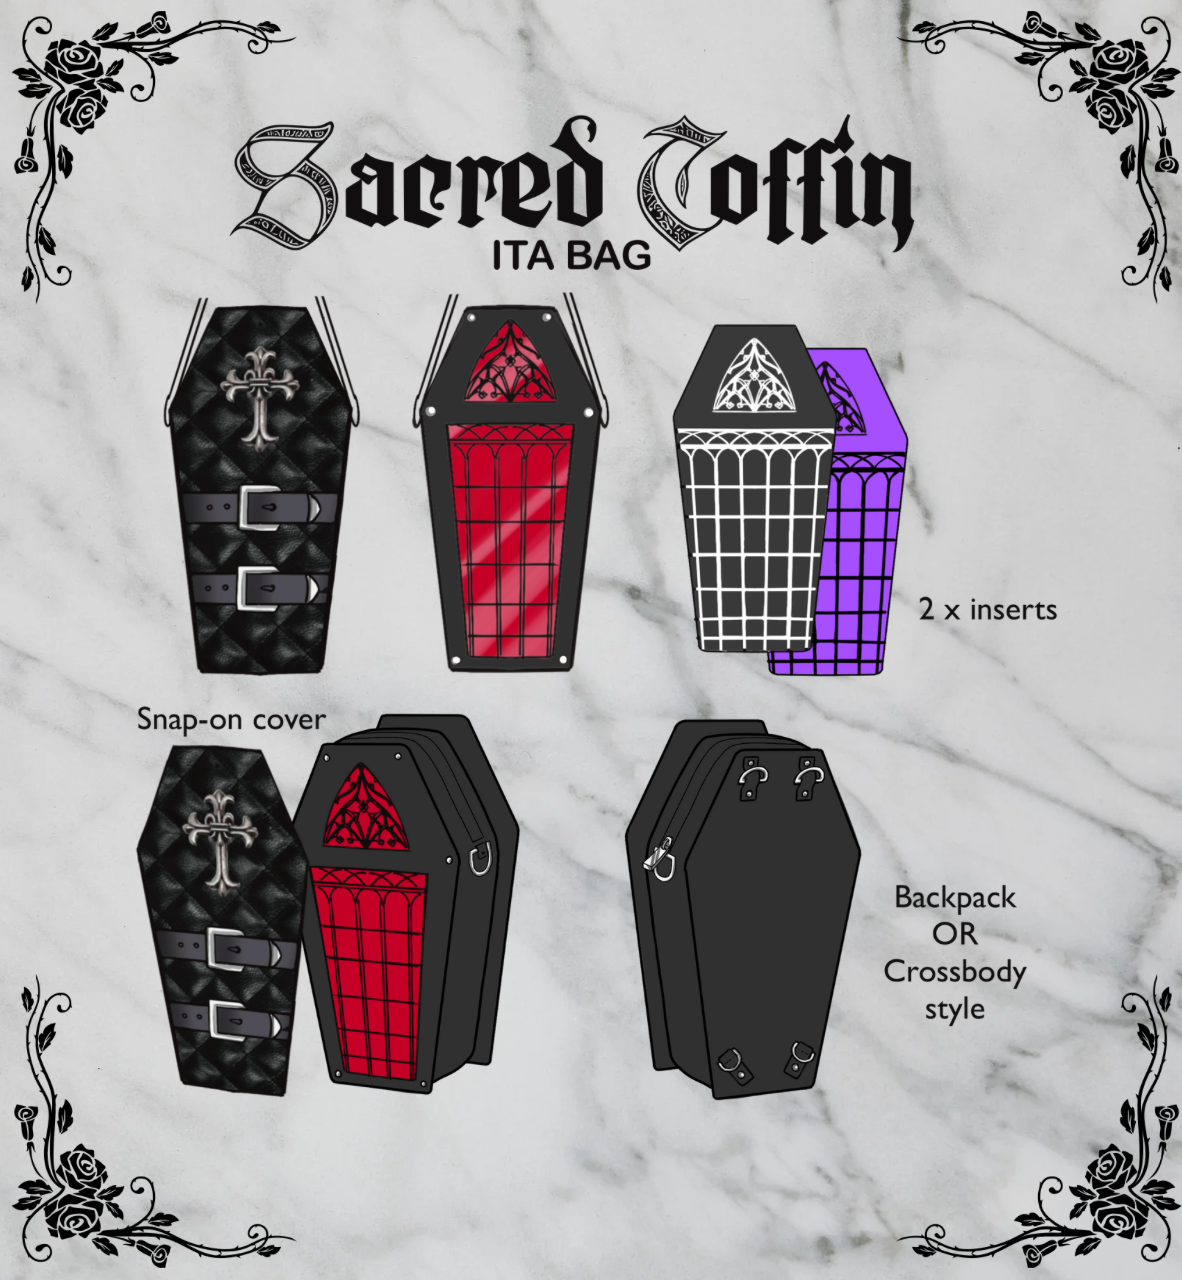 Sacred Coffin Ita Bag with Removable Cover